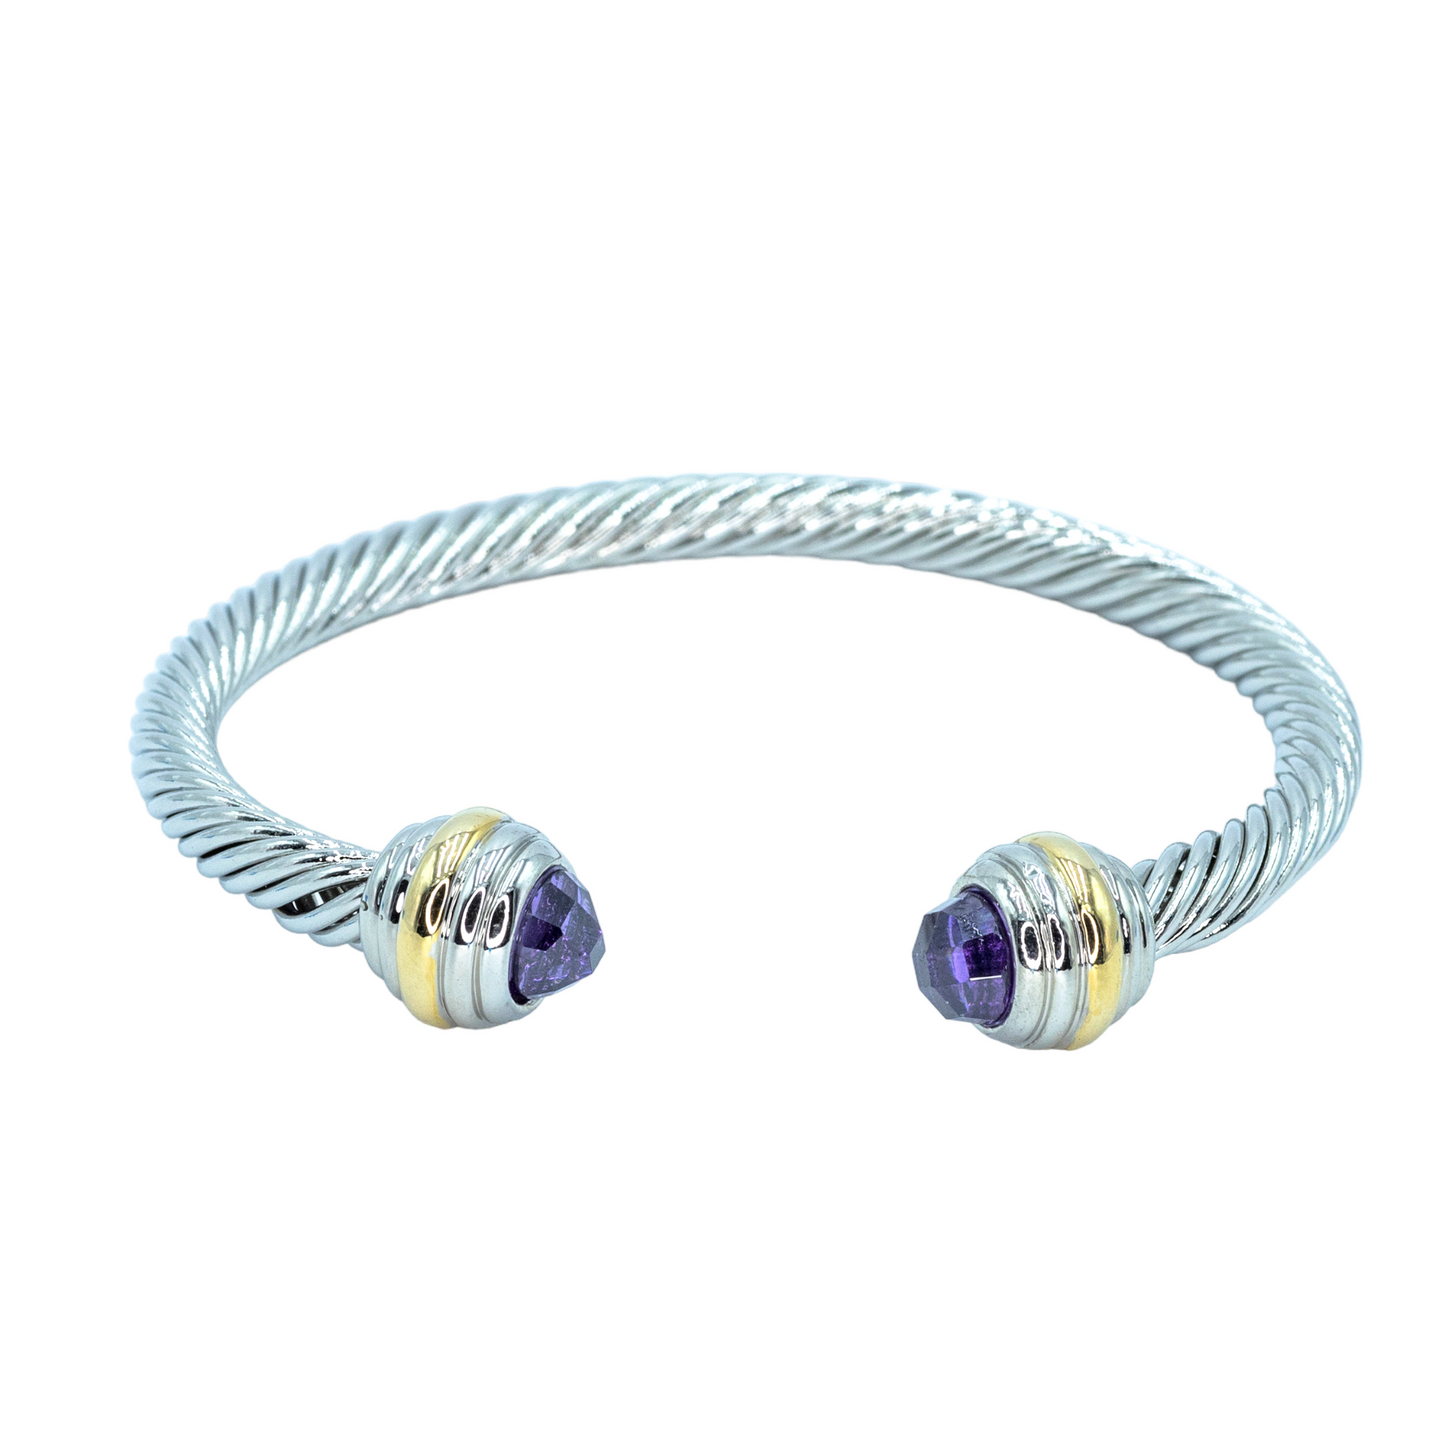 Rhodium plated w/ gold bangle and amethyst stone